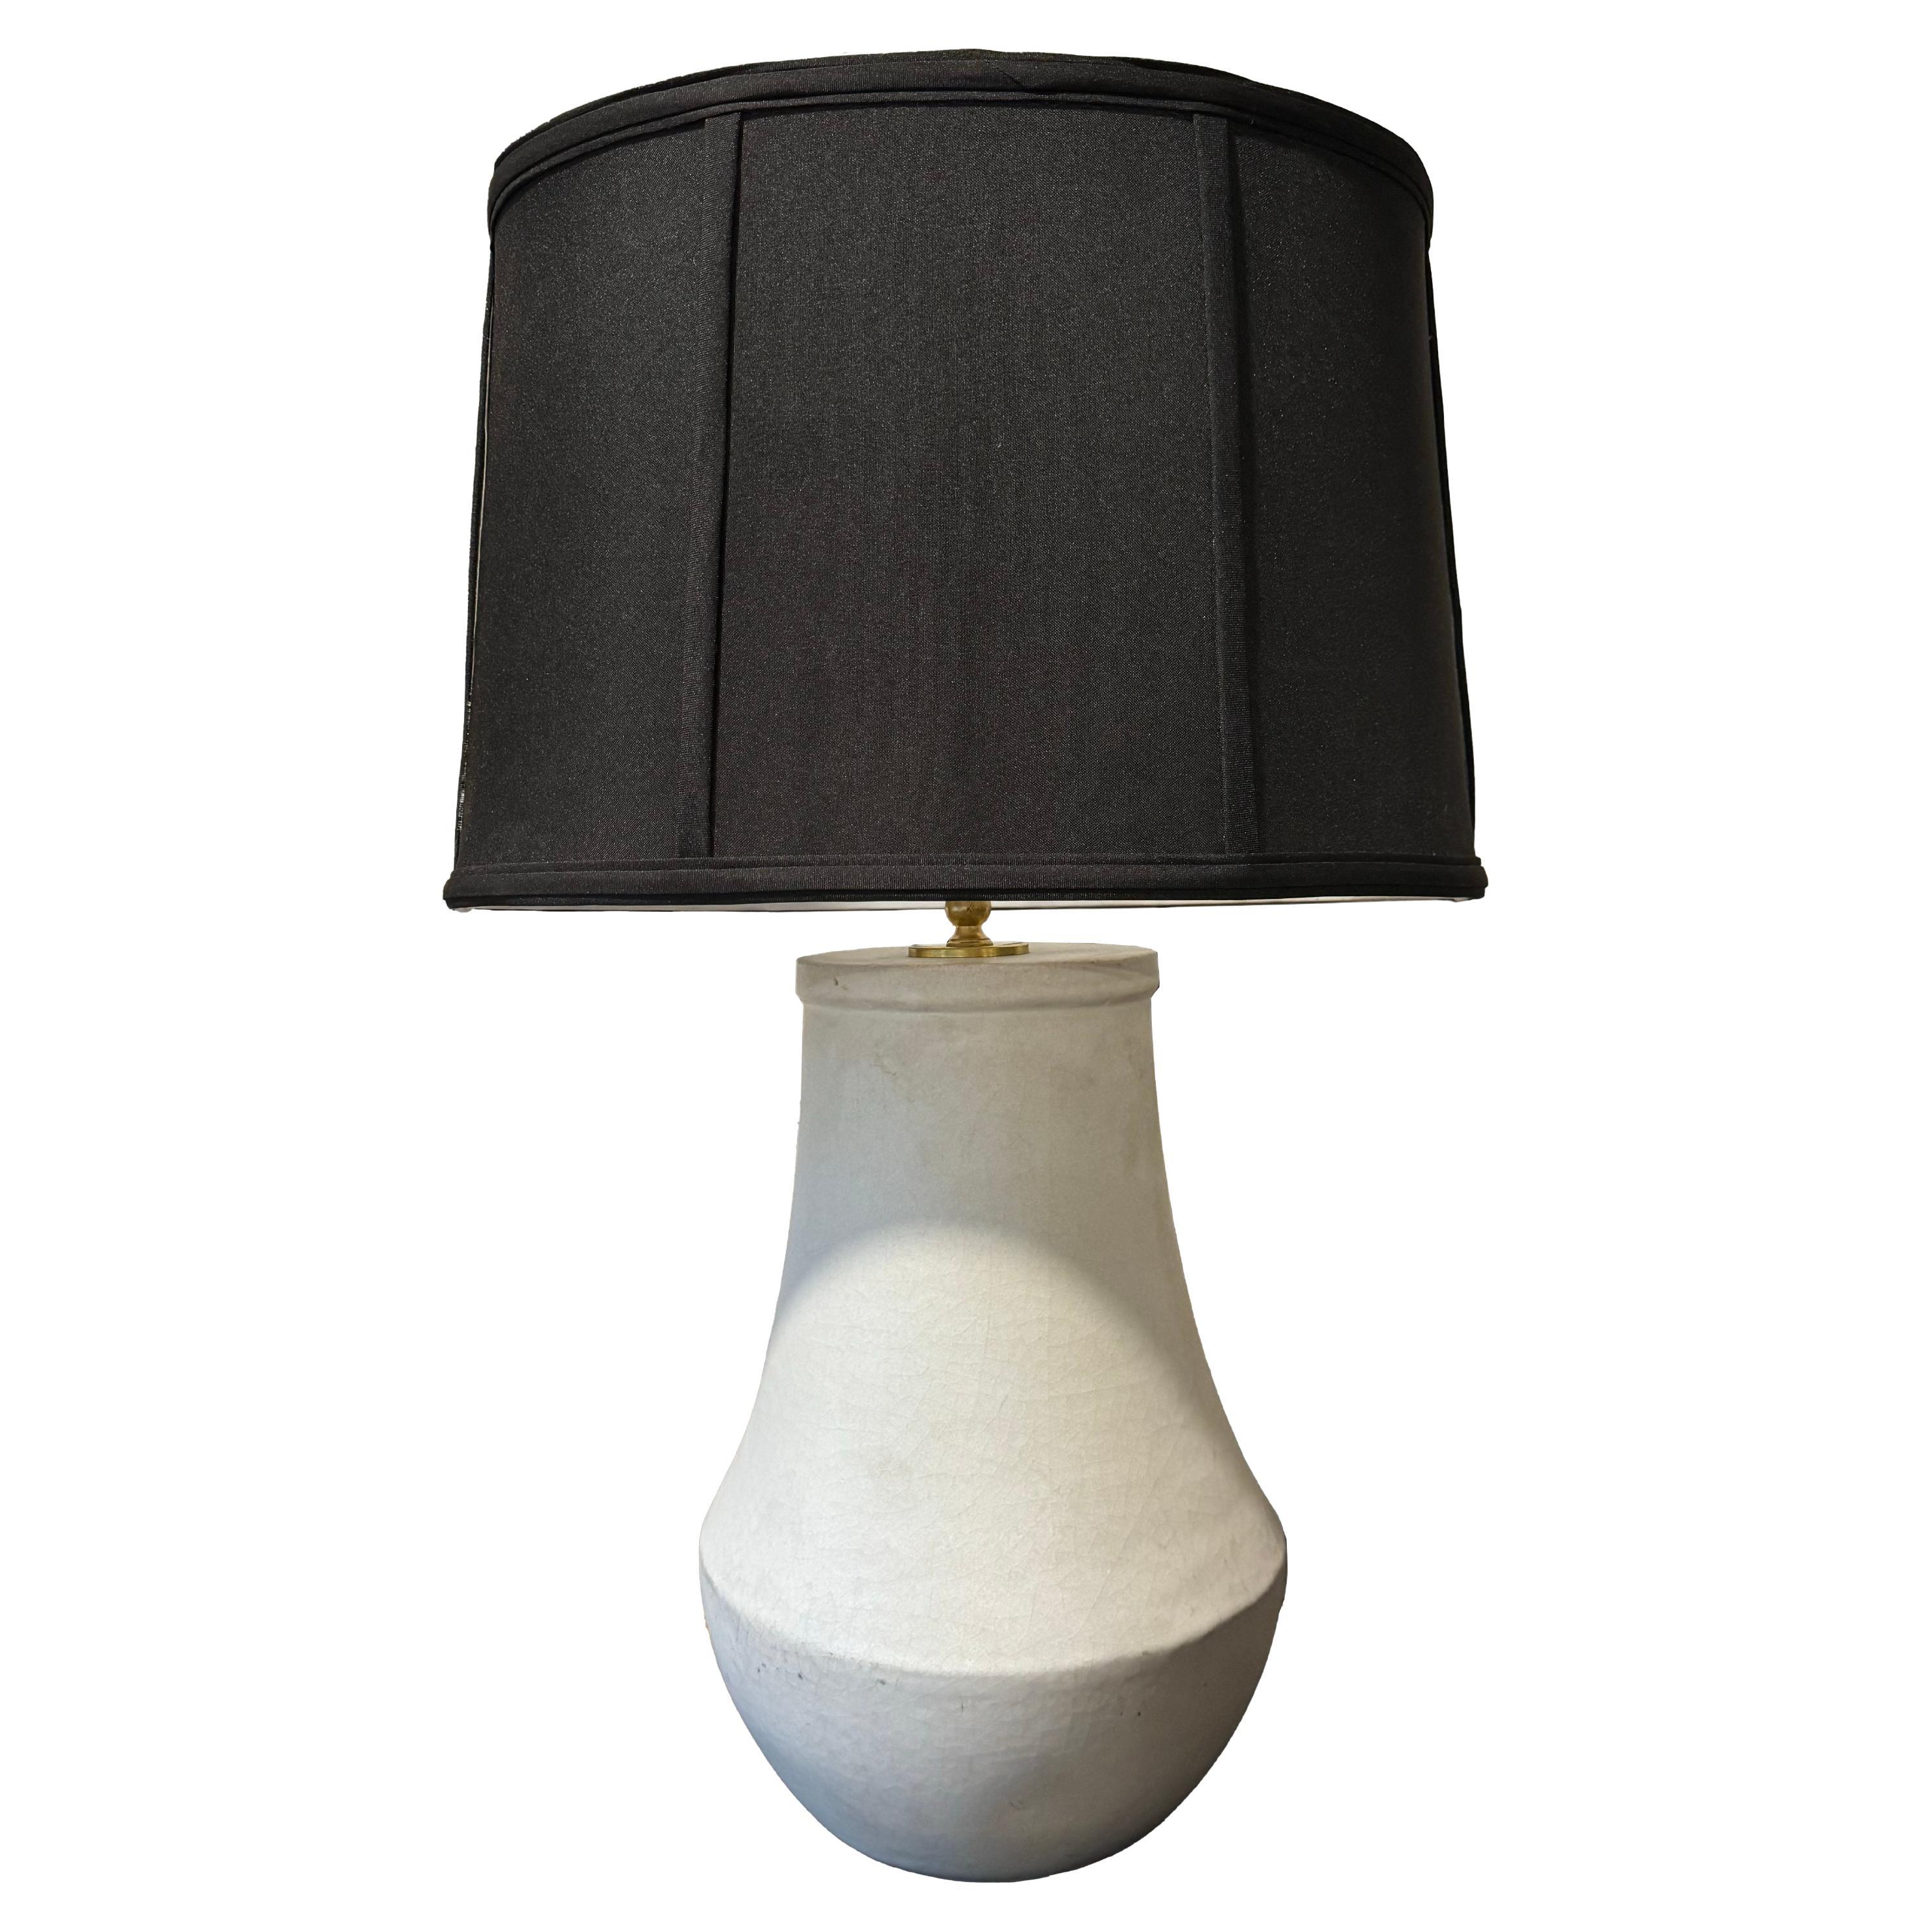 Rose Tarlow Lamp w/ Black Oval Shade For Sale